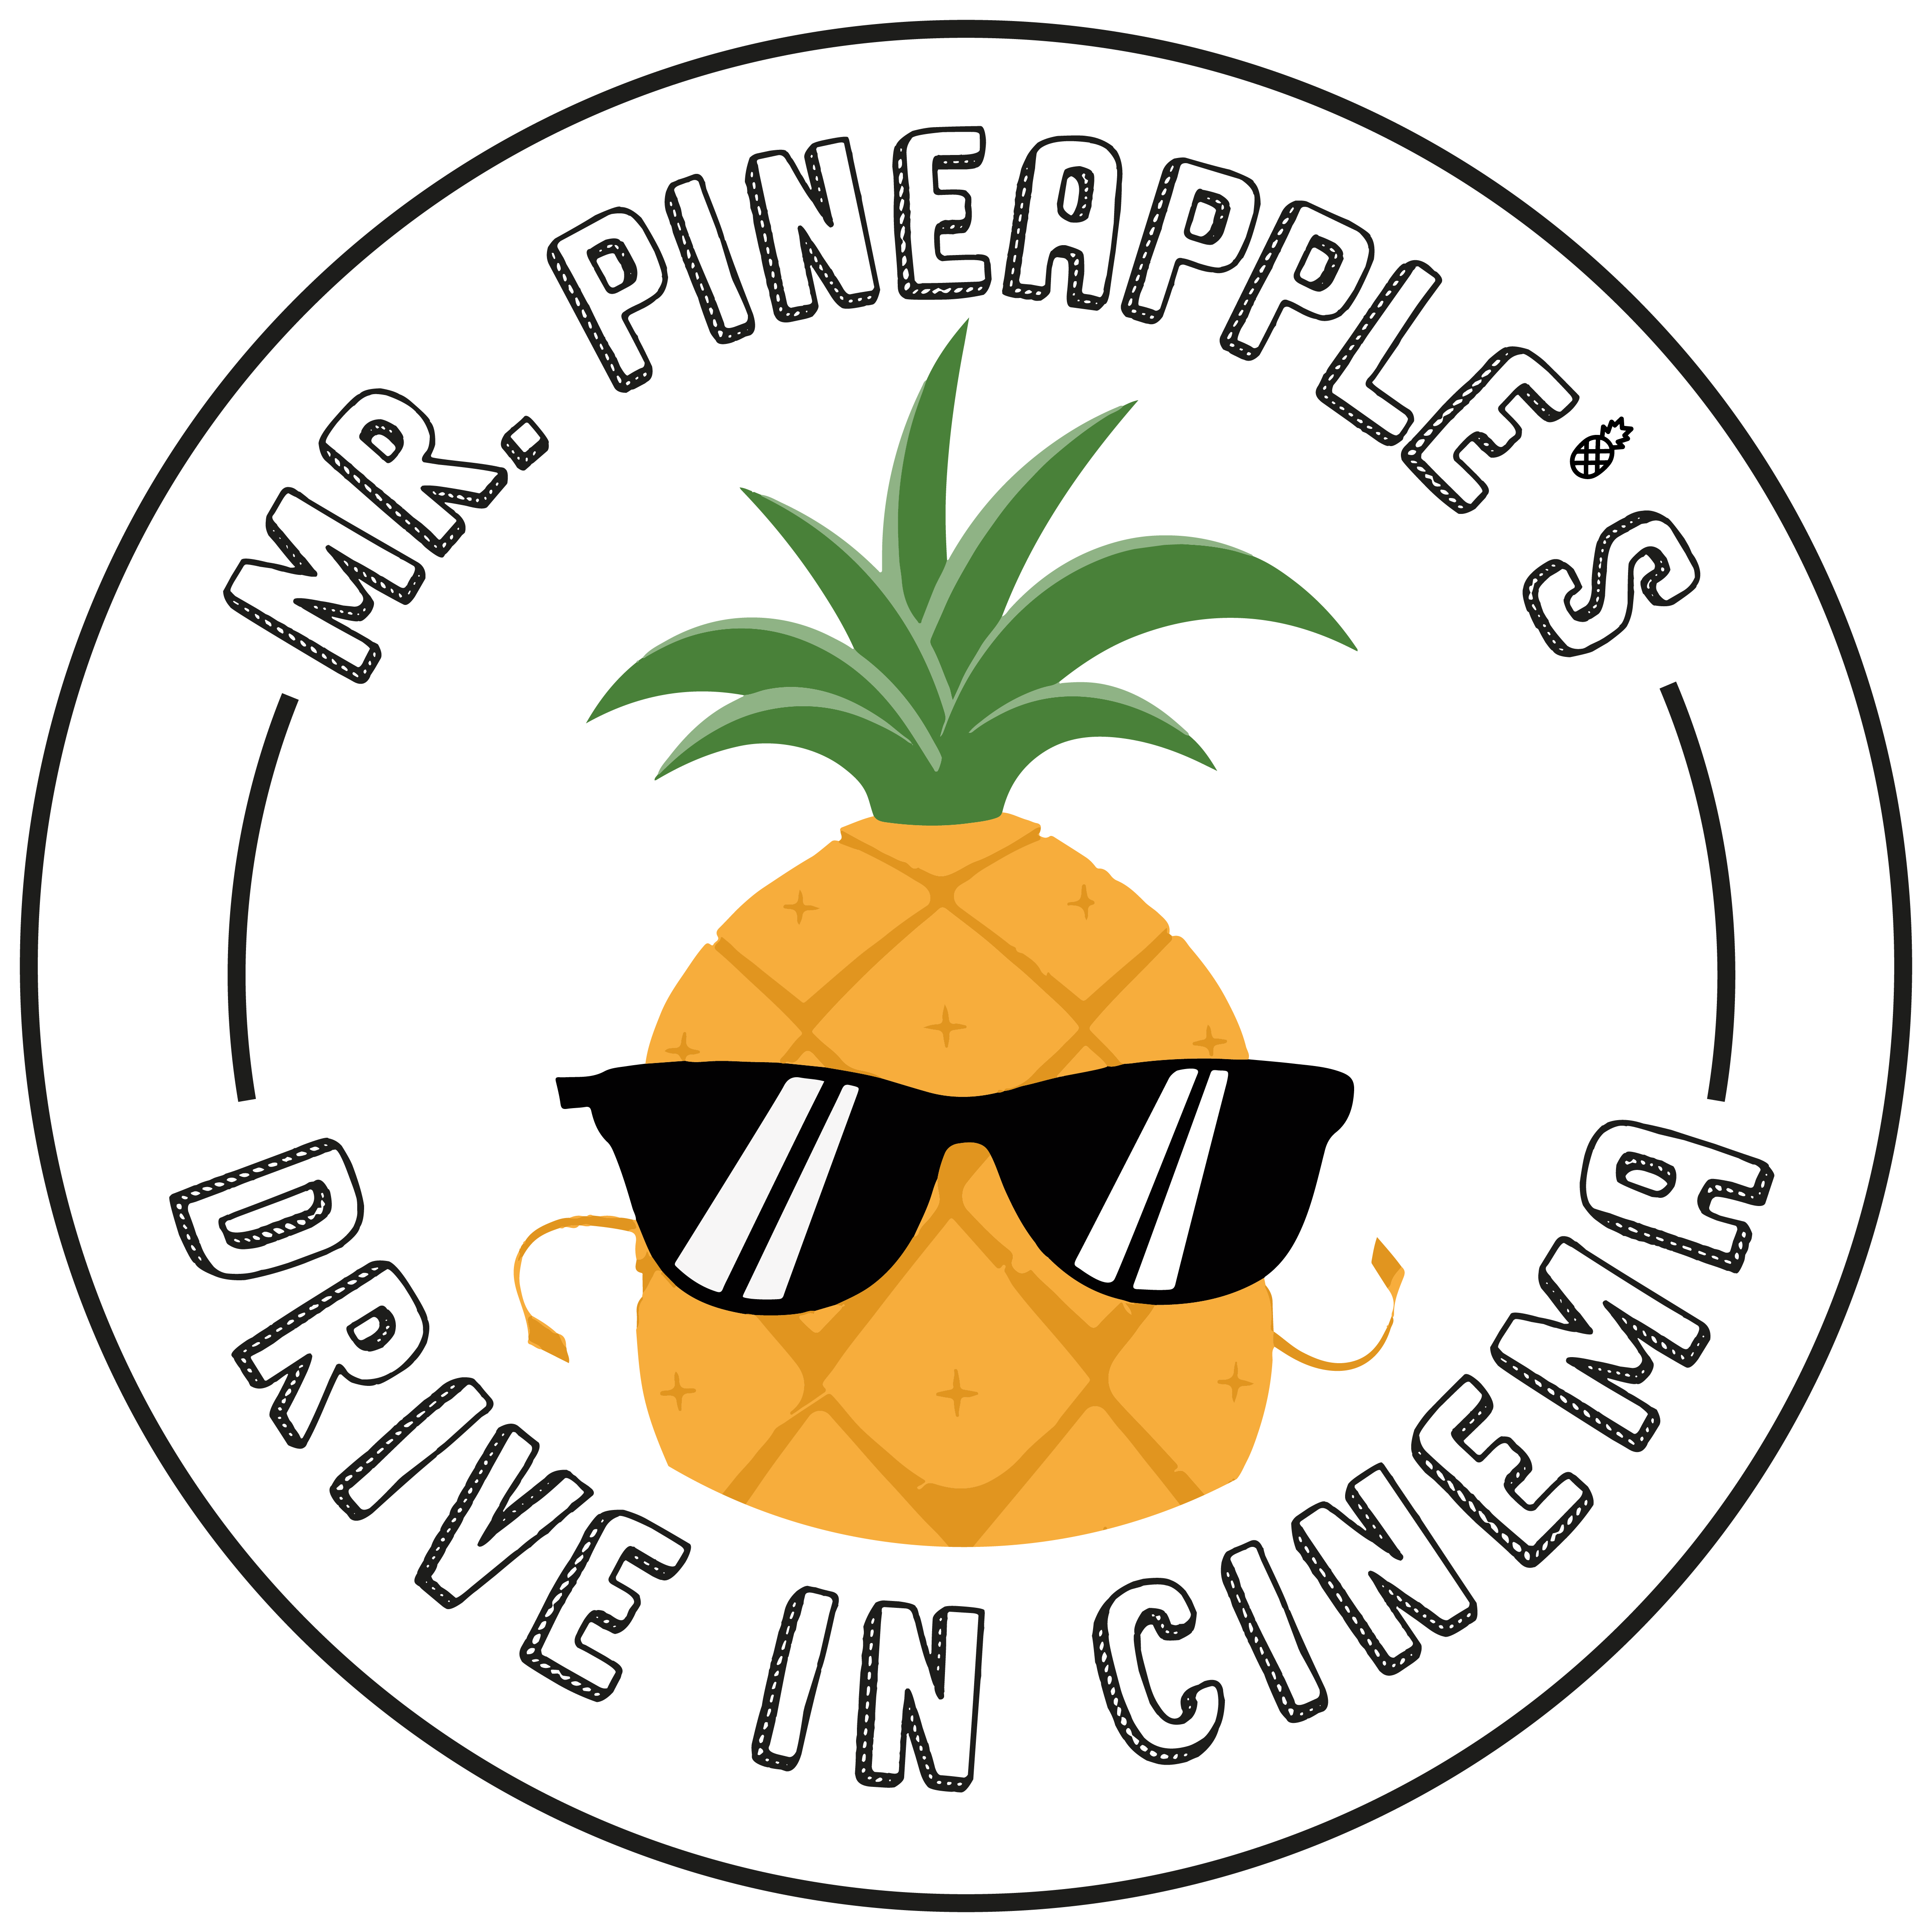 Mr Pineapple's Events